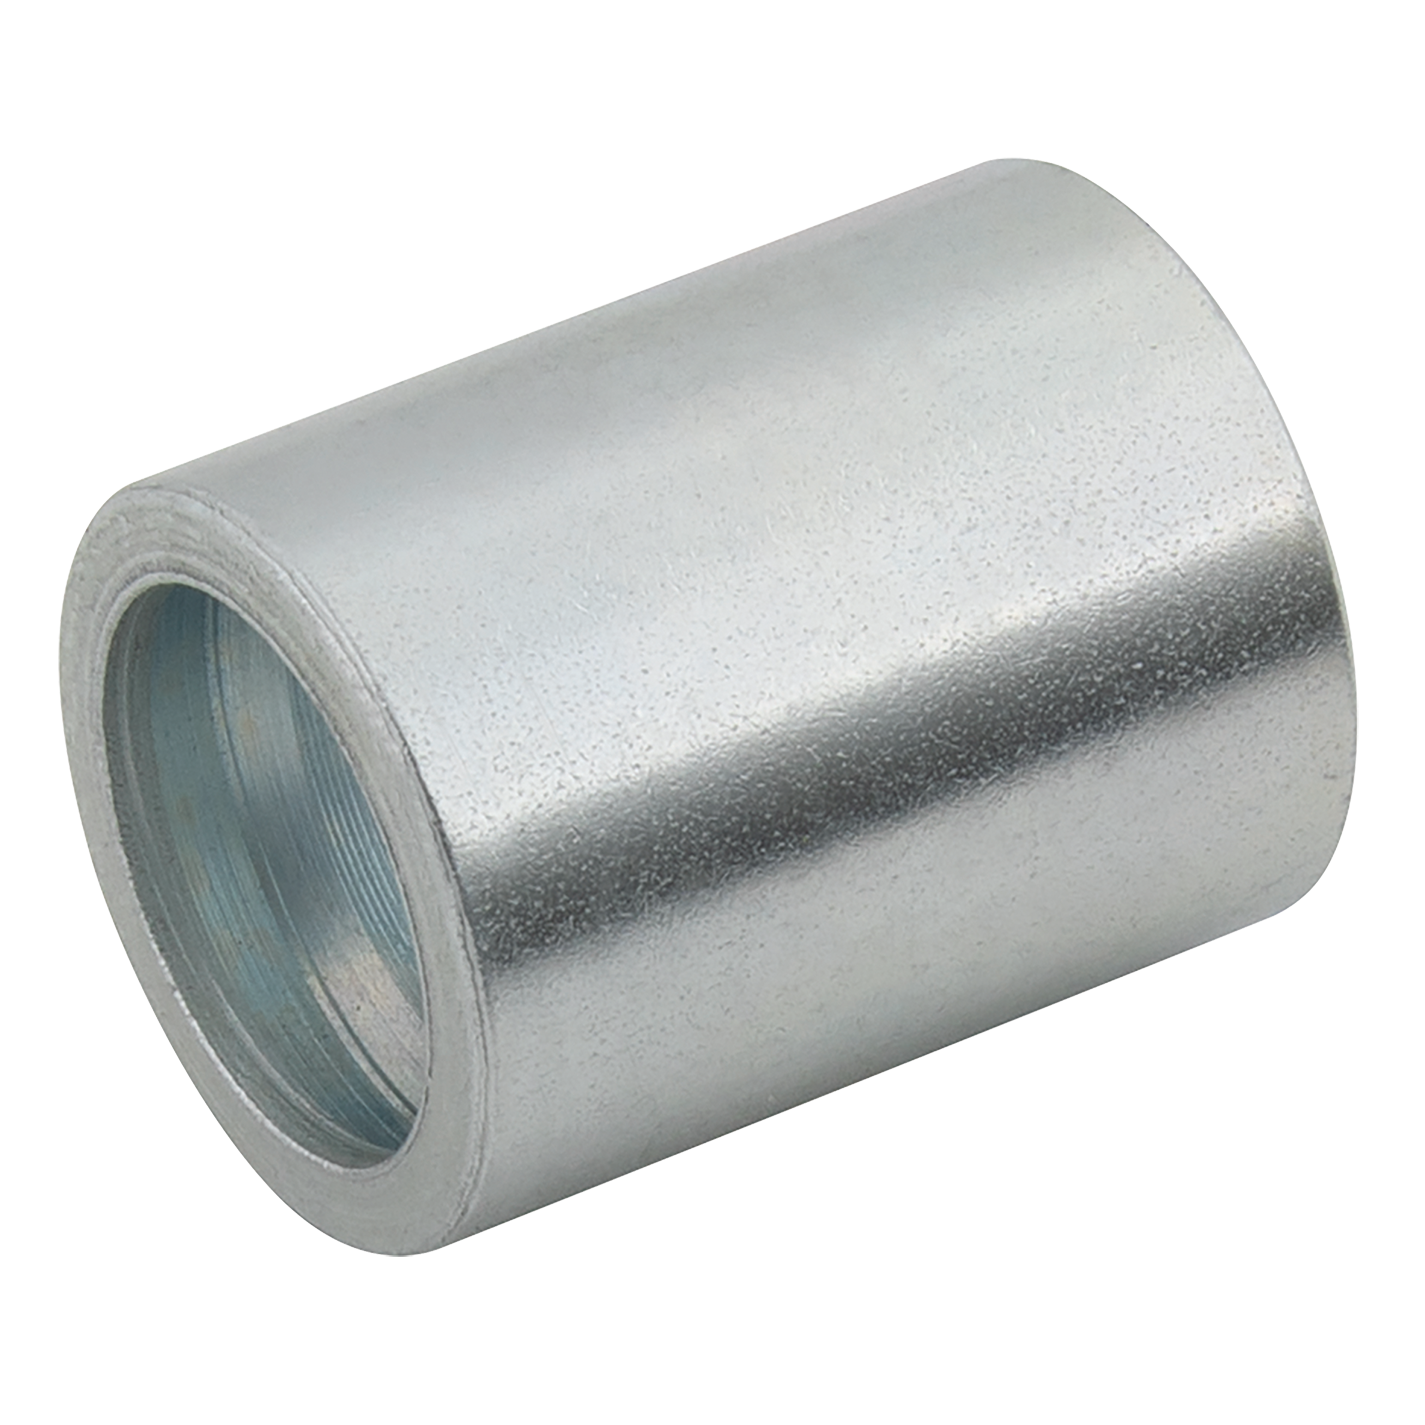  1/2"Hose Insert Ferrule Smooth and Convoluted Bore